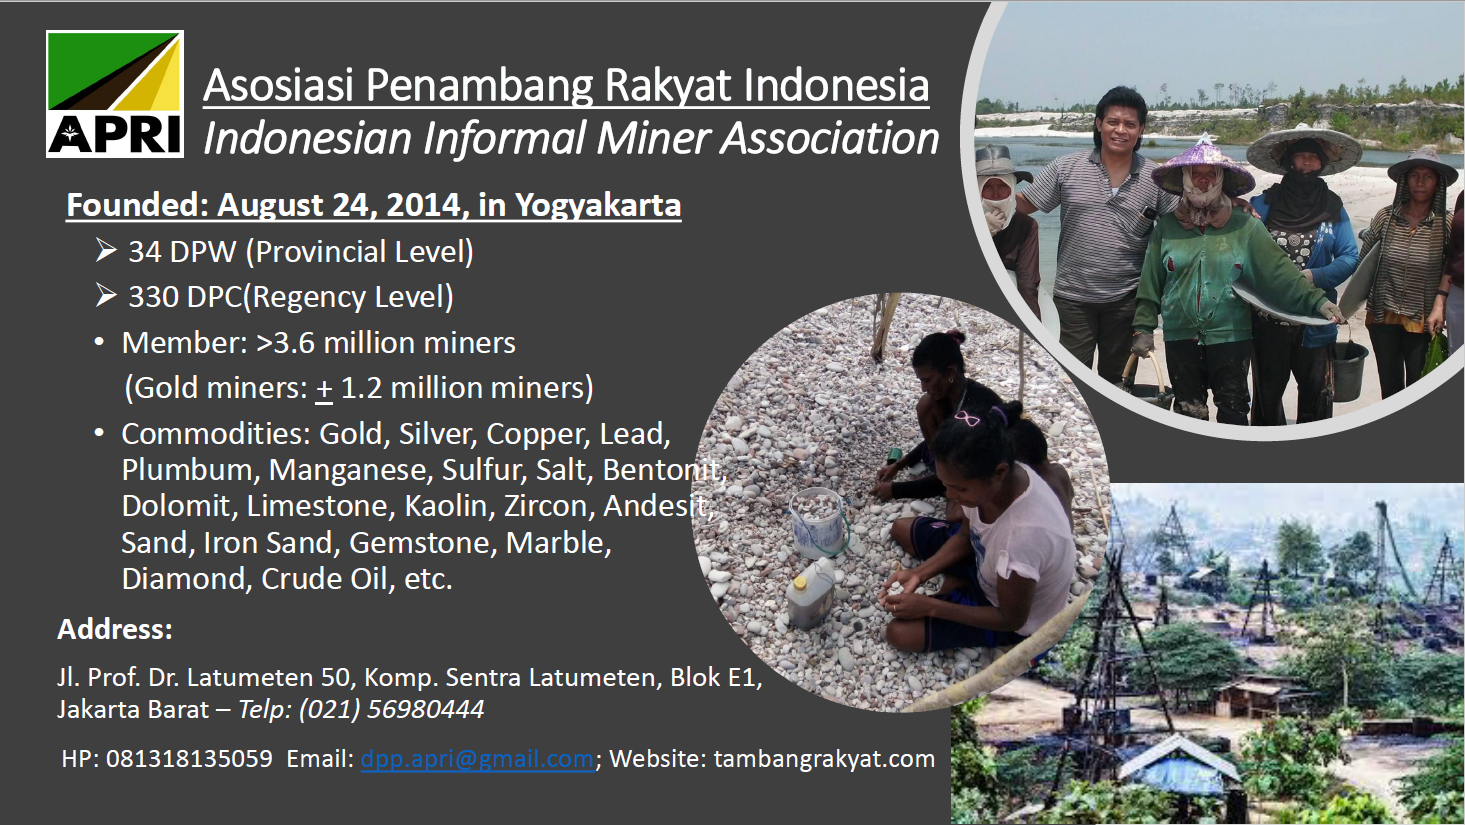 First page of Artisanal and Small-Scale Gold Mining (ASGM) in Indonesia